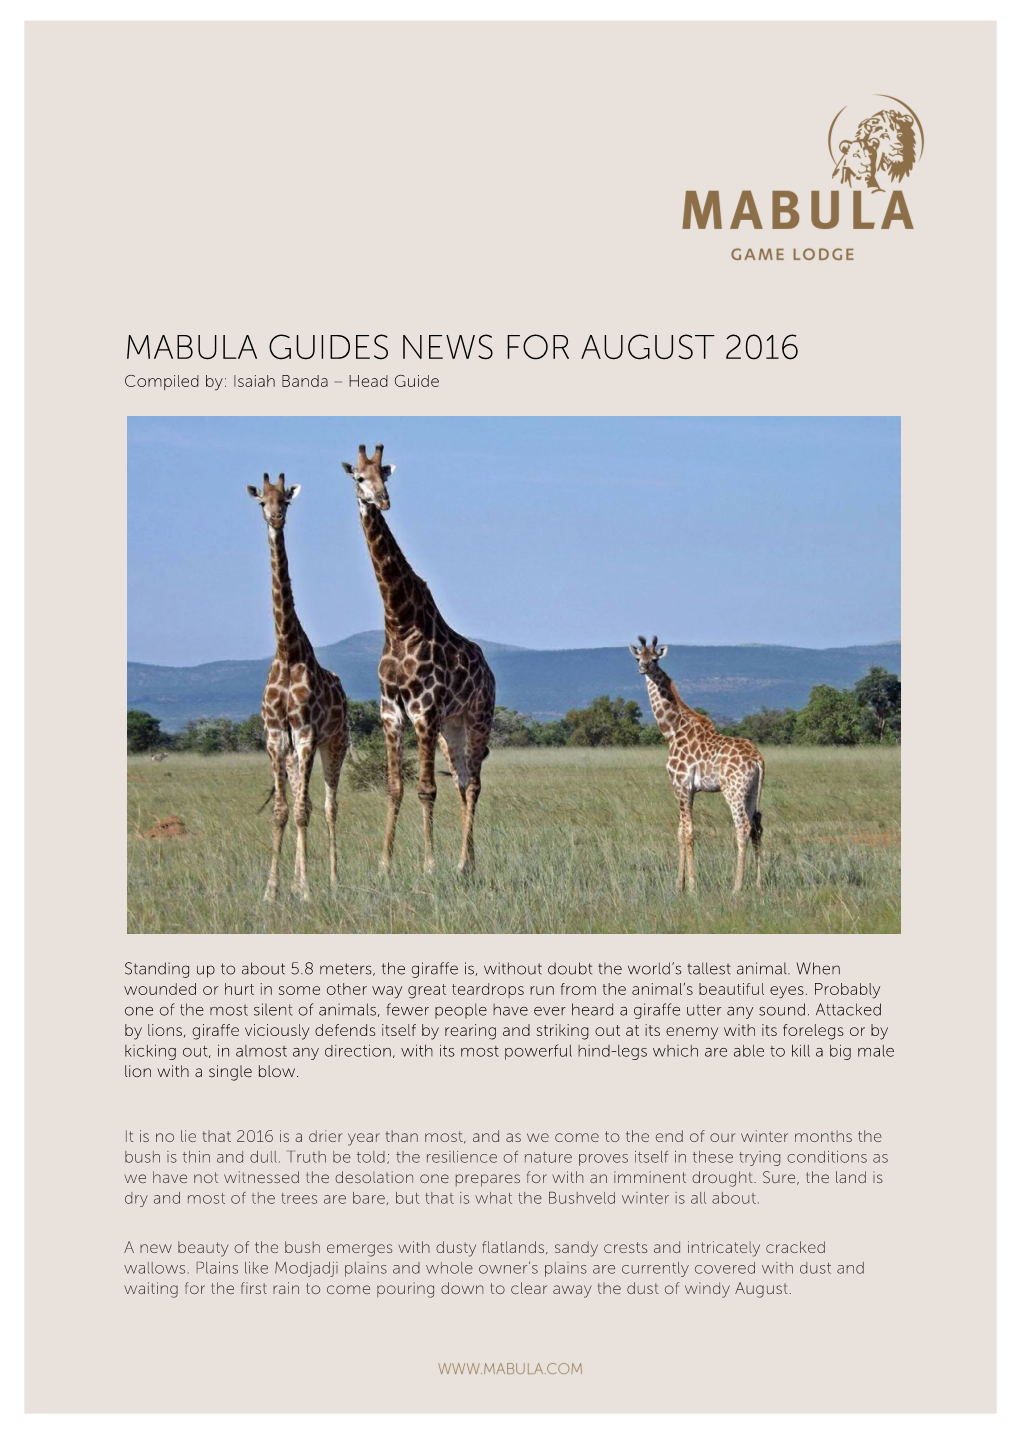 MABULA GUIDES NEWS for AUGUST 2016 Compiled By: Isaiah Banda – Head Guide